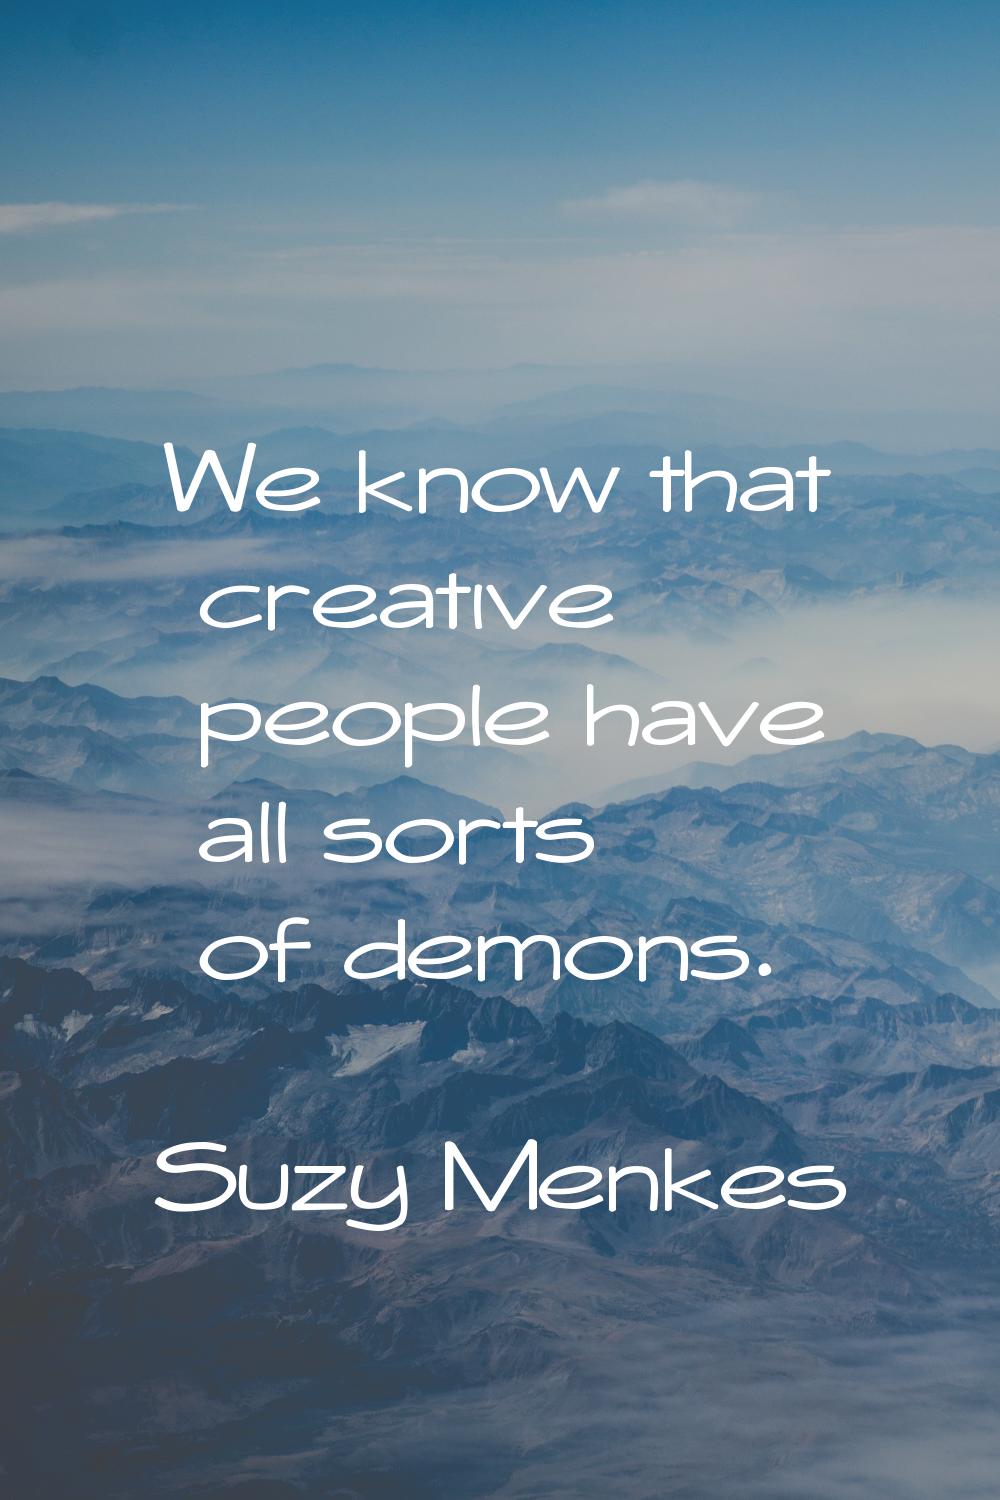 We know that creative people have all sorts of demons.